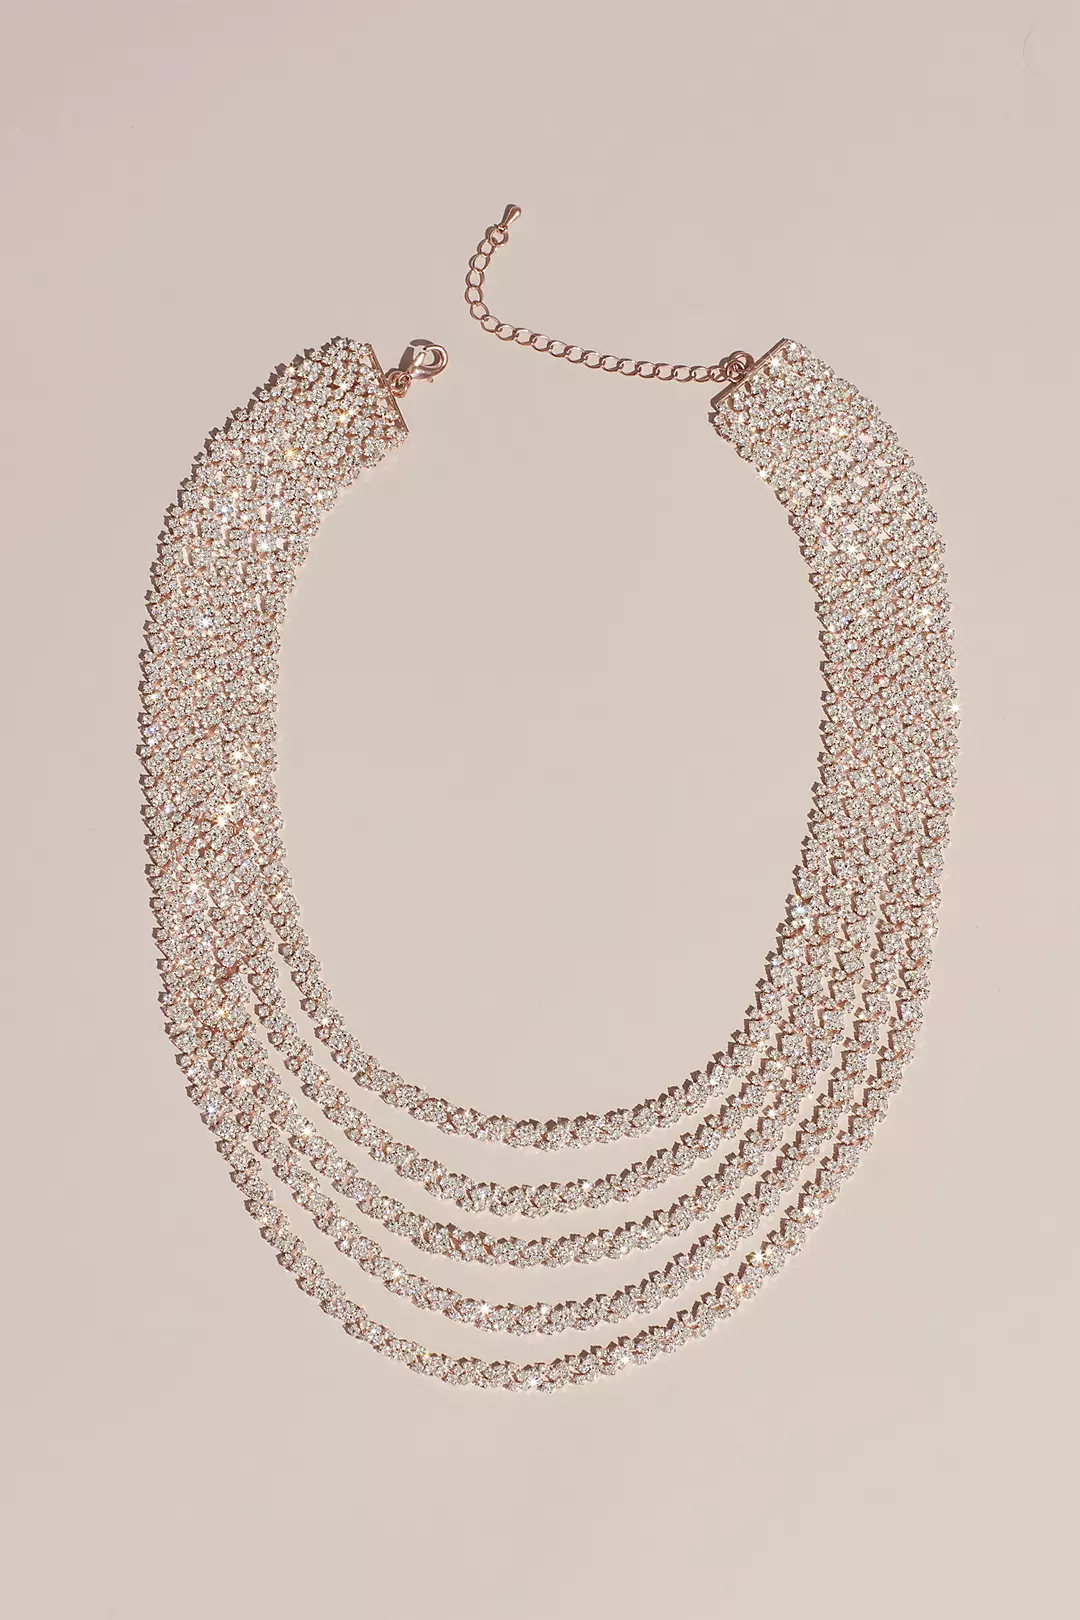 Dangling Crystal Chains Layered Necklace Image